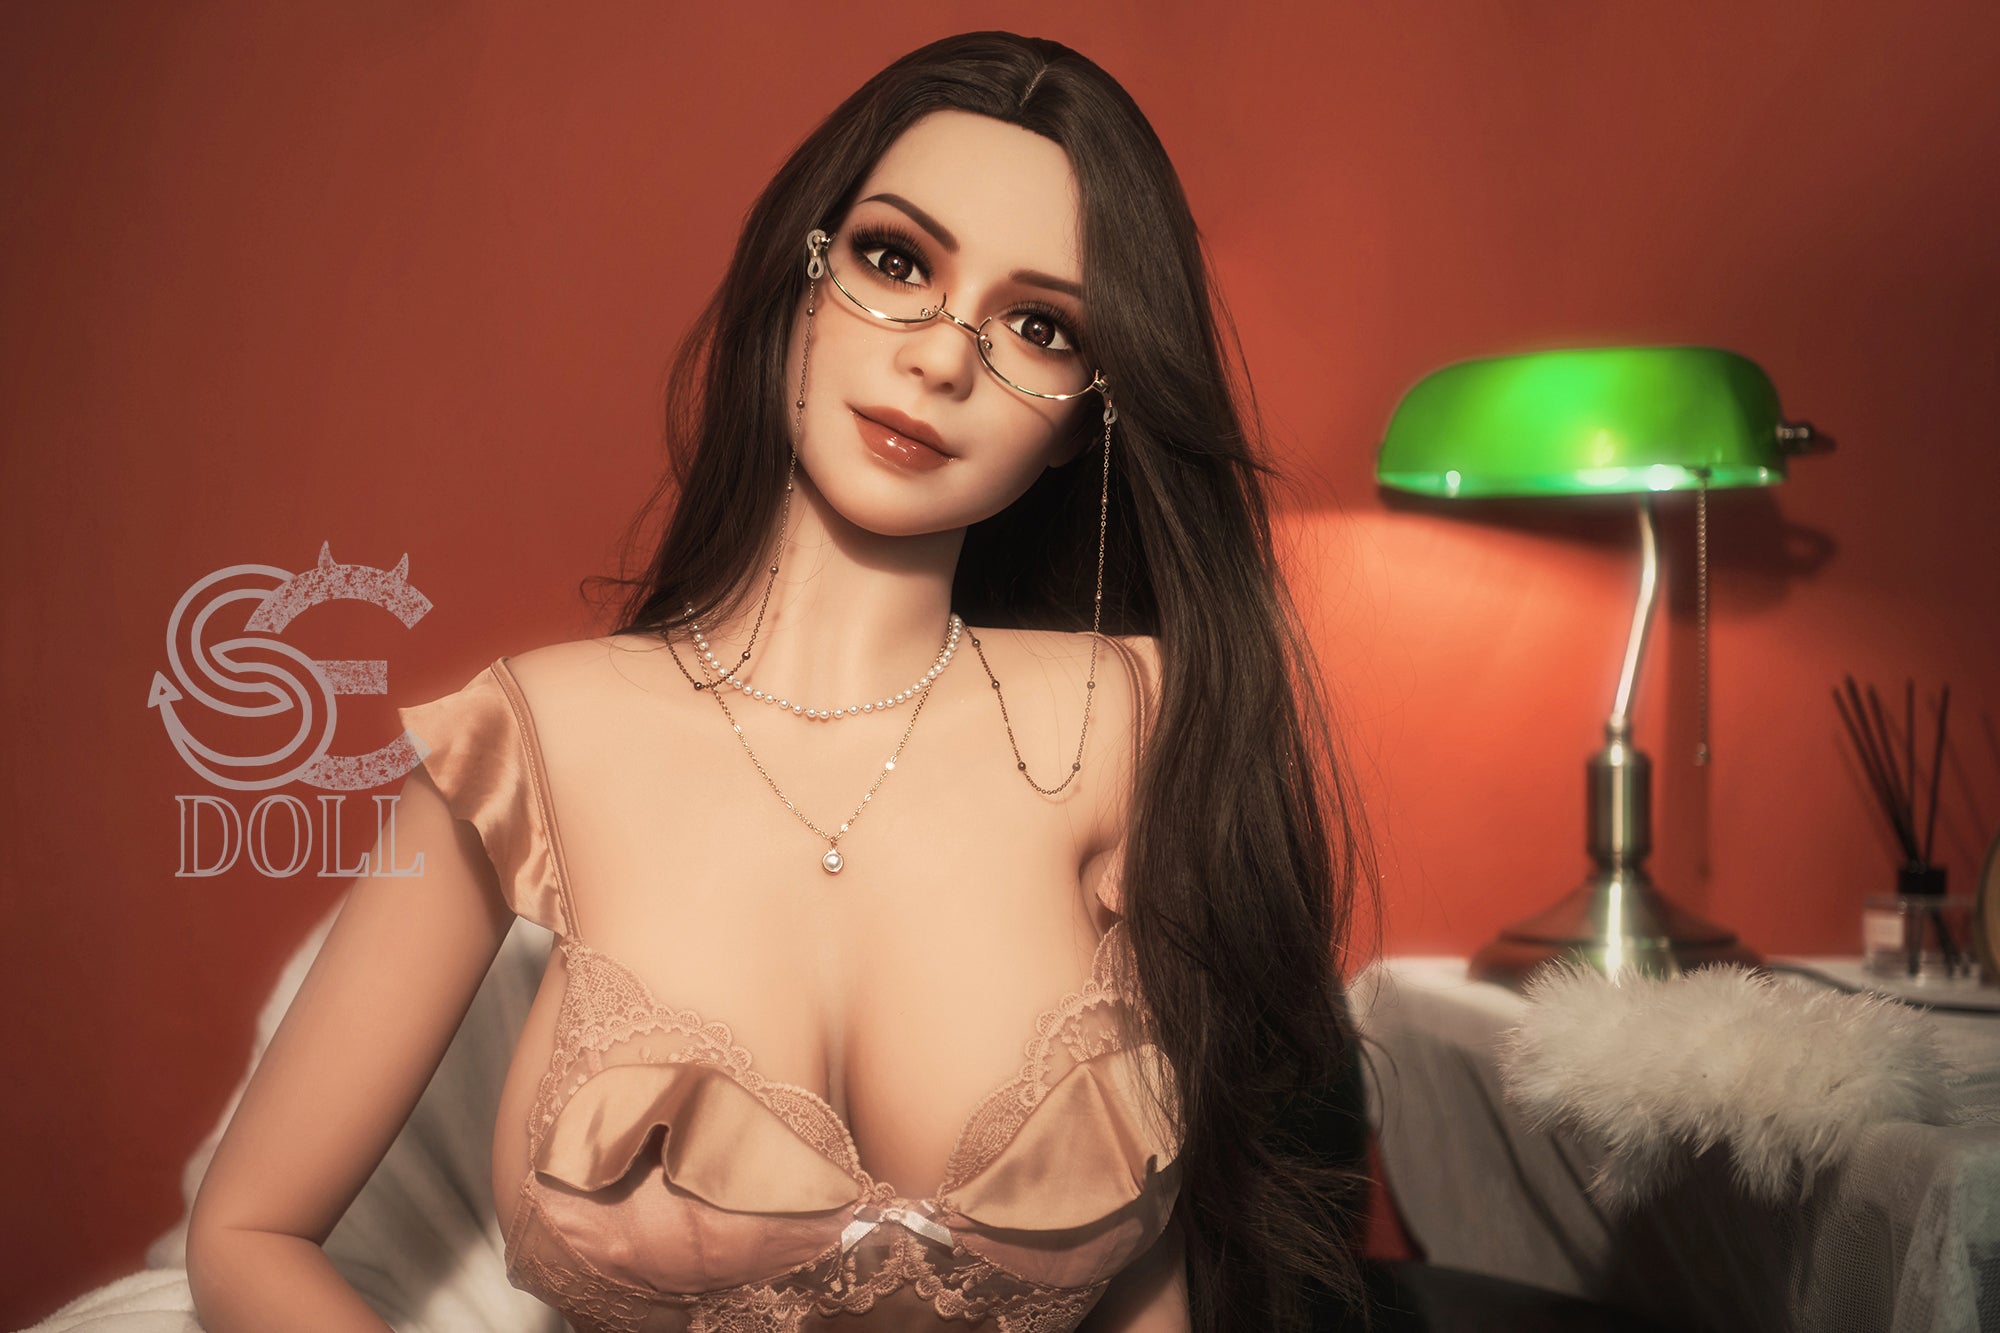 SEDOLL 157 cm H TPE - Camille | Buy Sex Dolls at DOLLS ACTUALLY